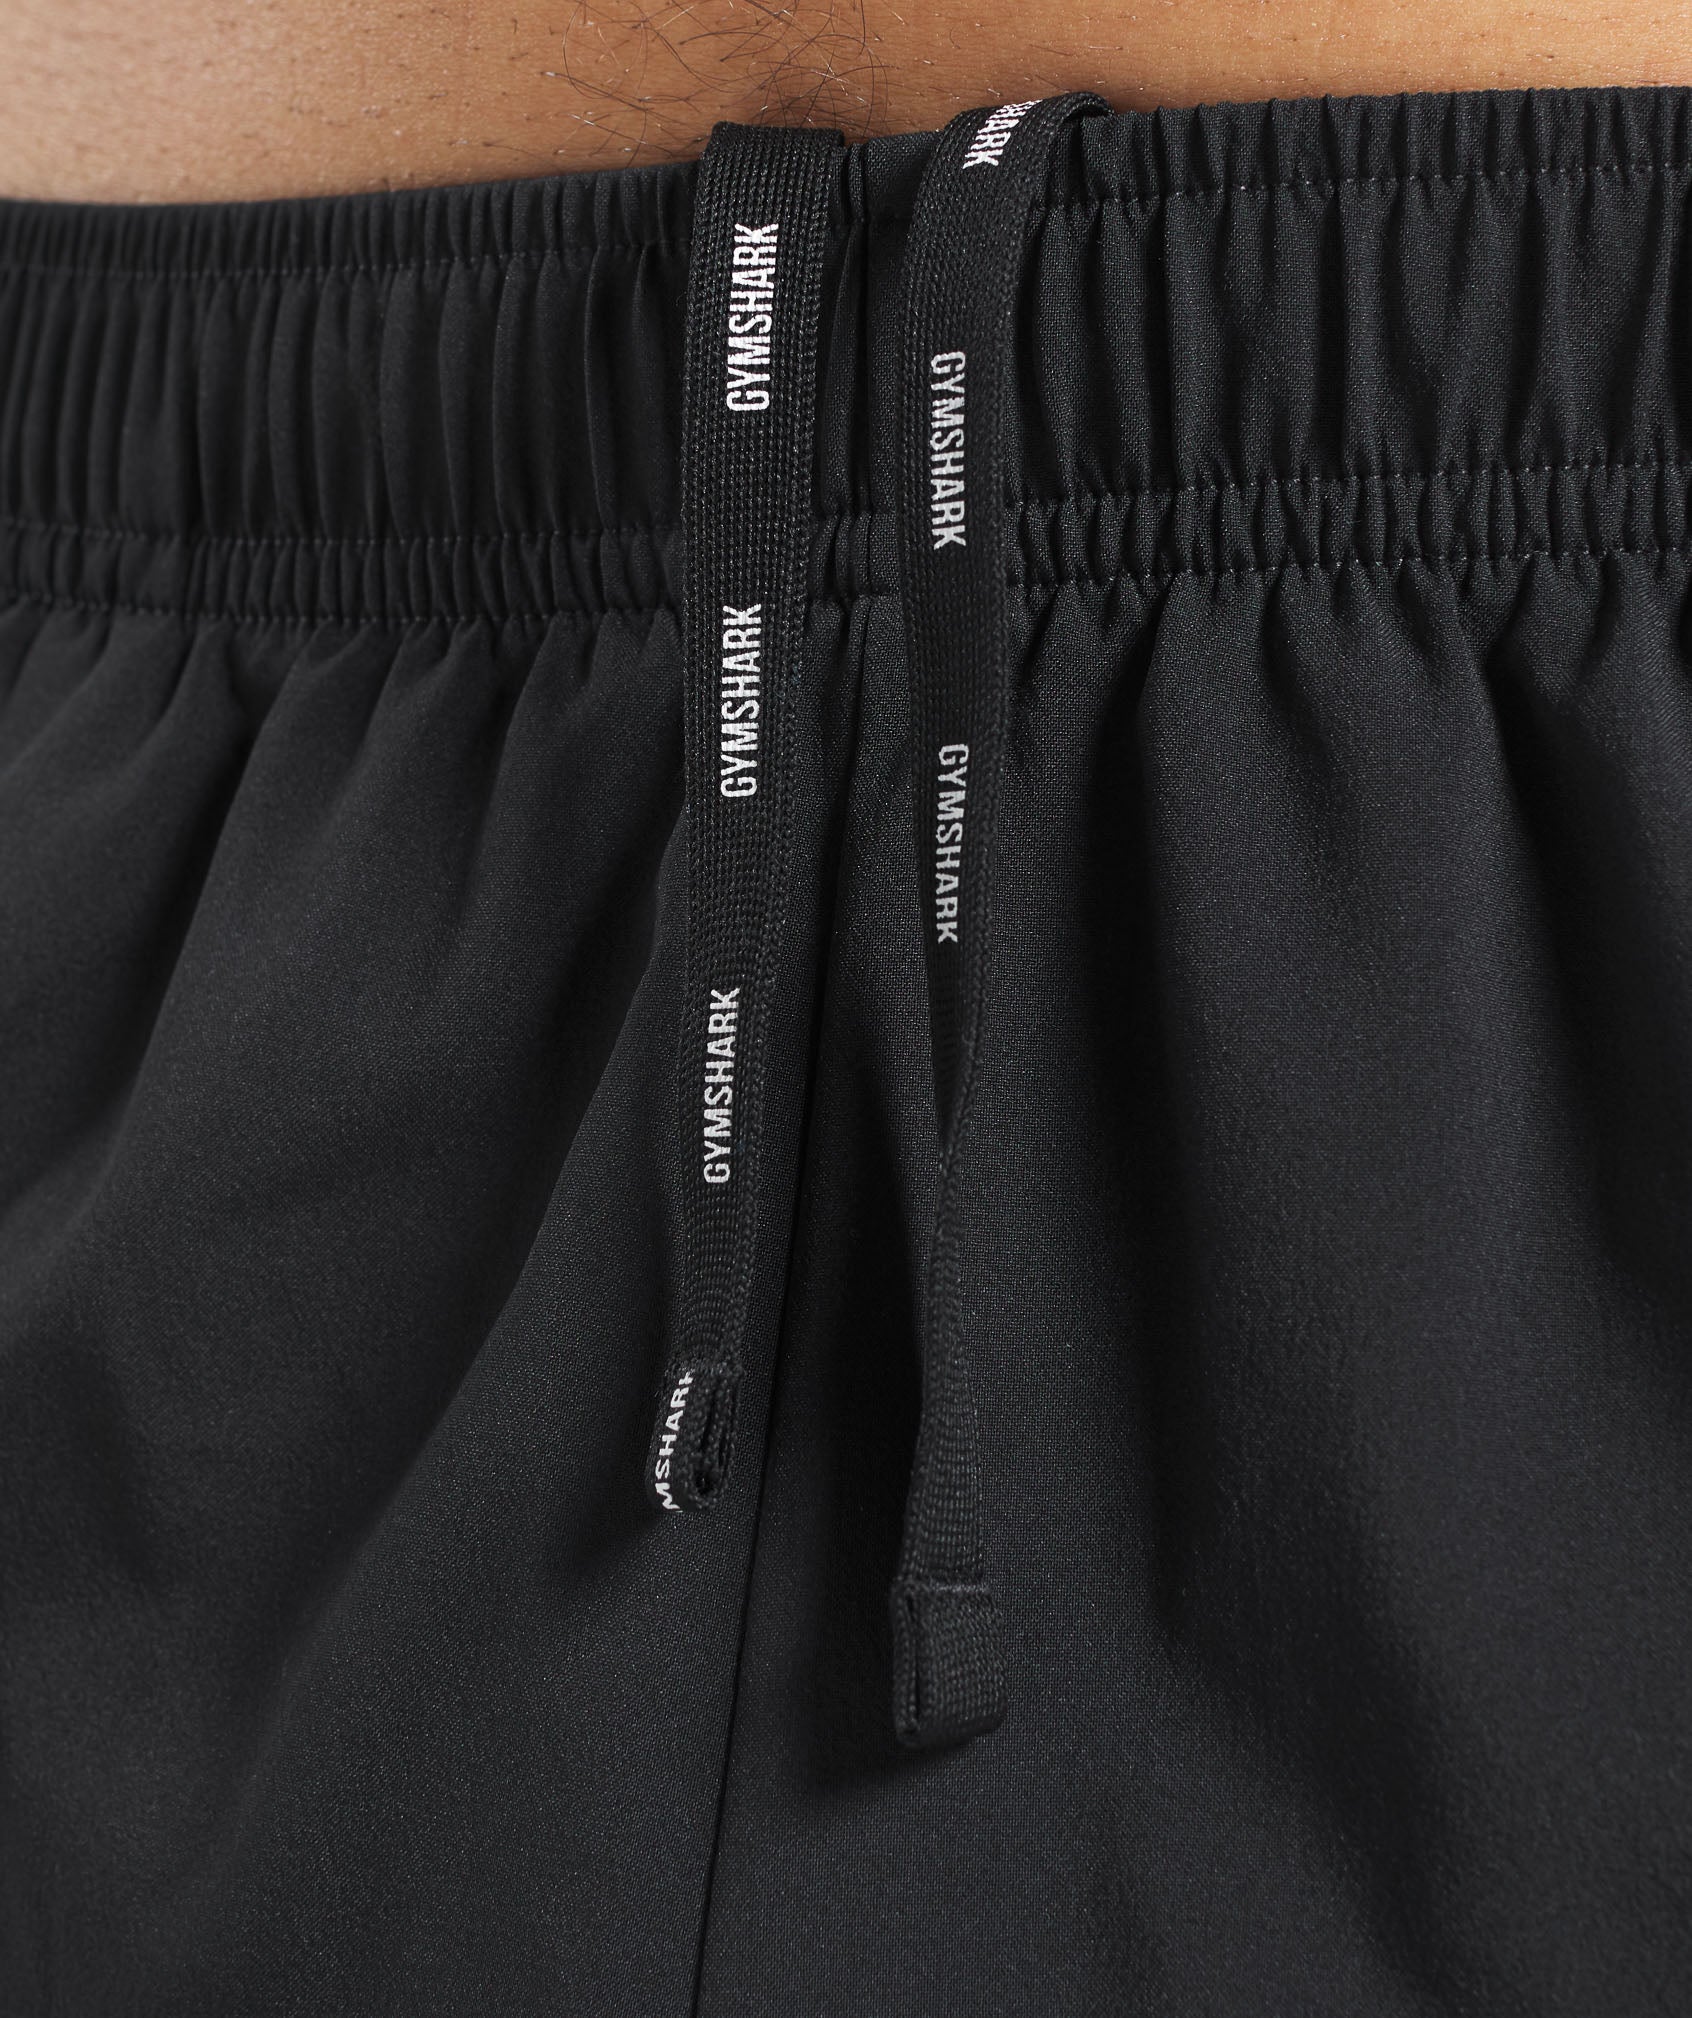 Arrival Graphic Shorts in Black